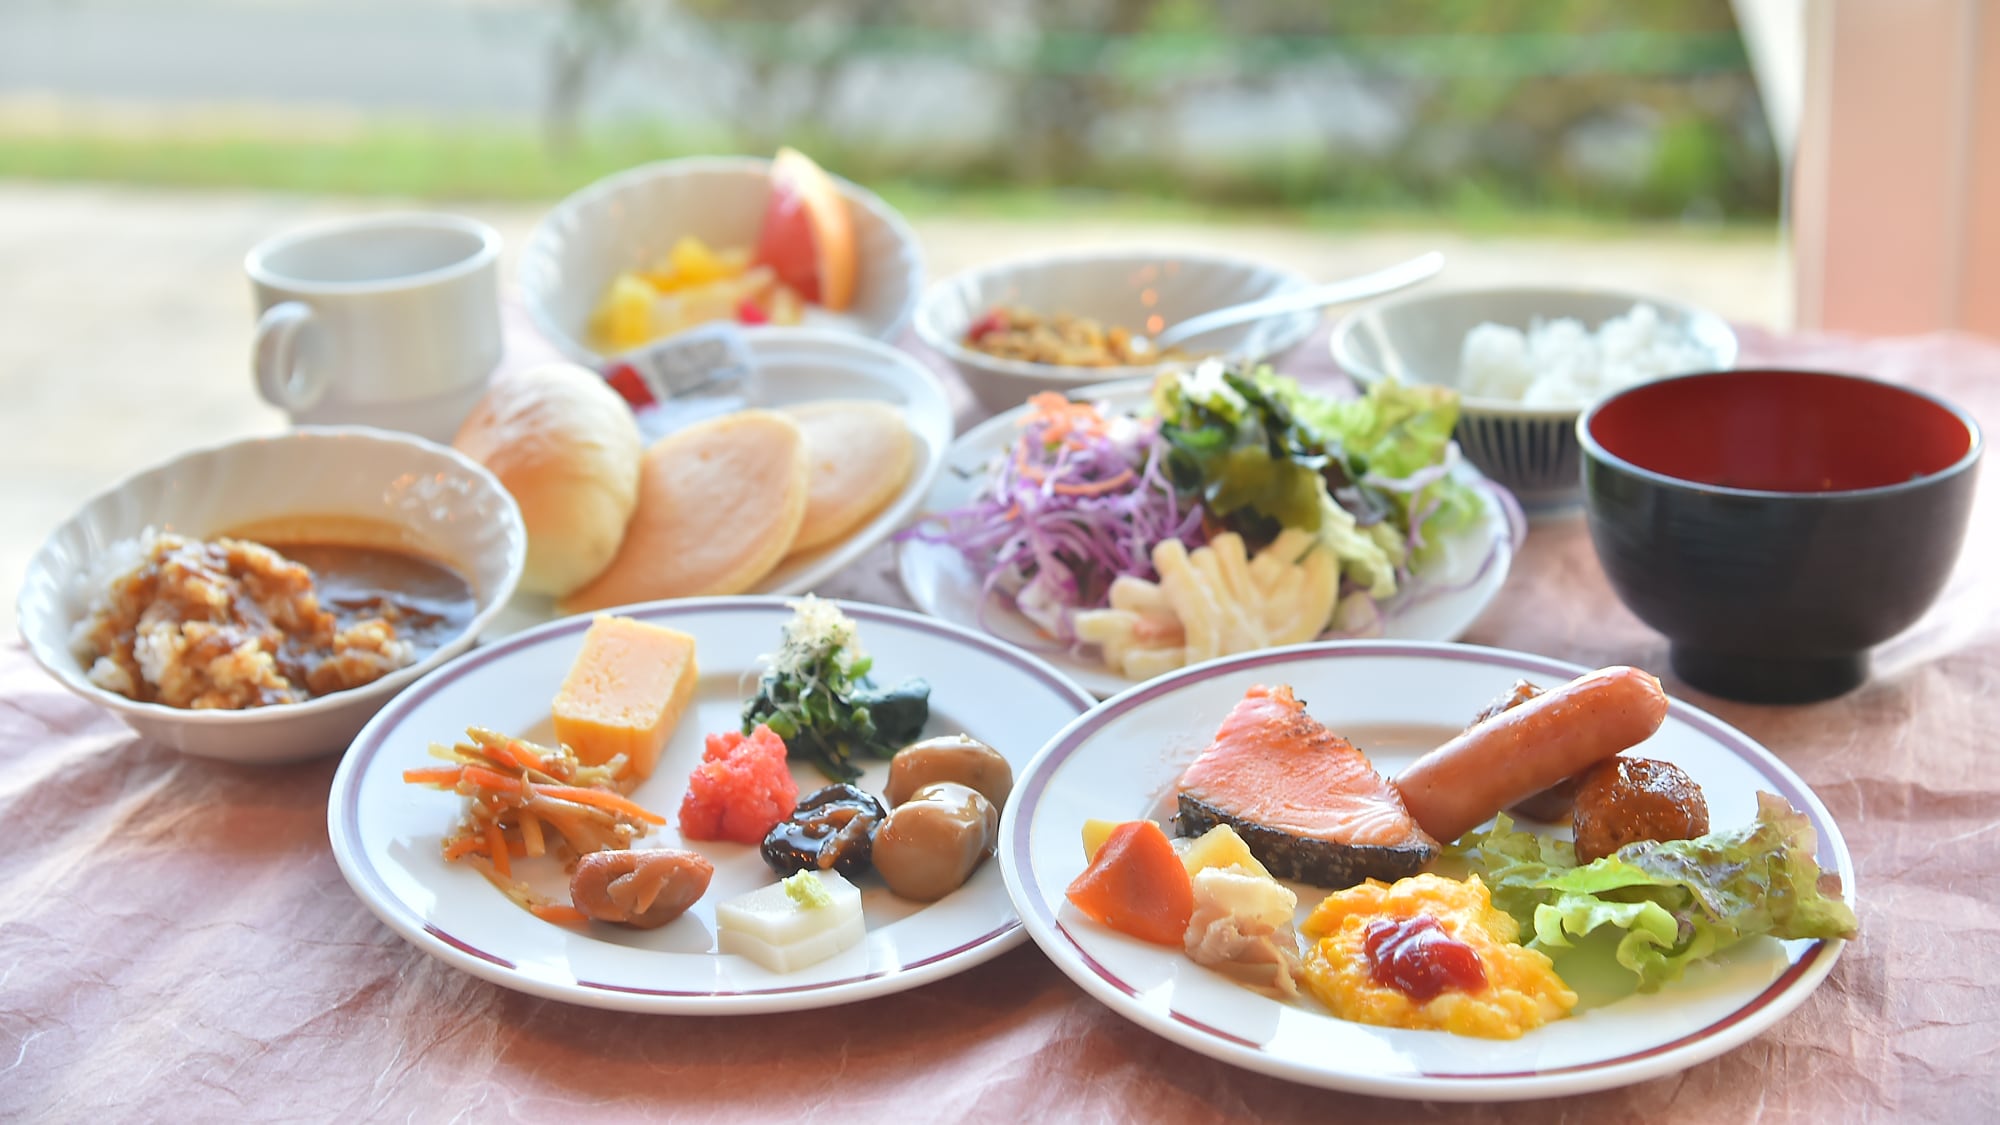 For breakfast, choose what you like from the buffet♪